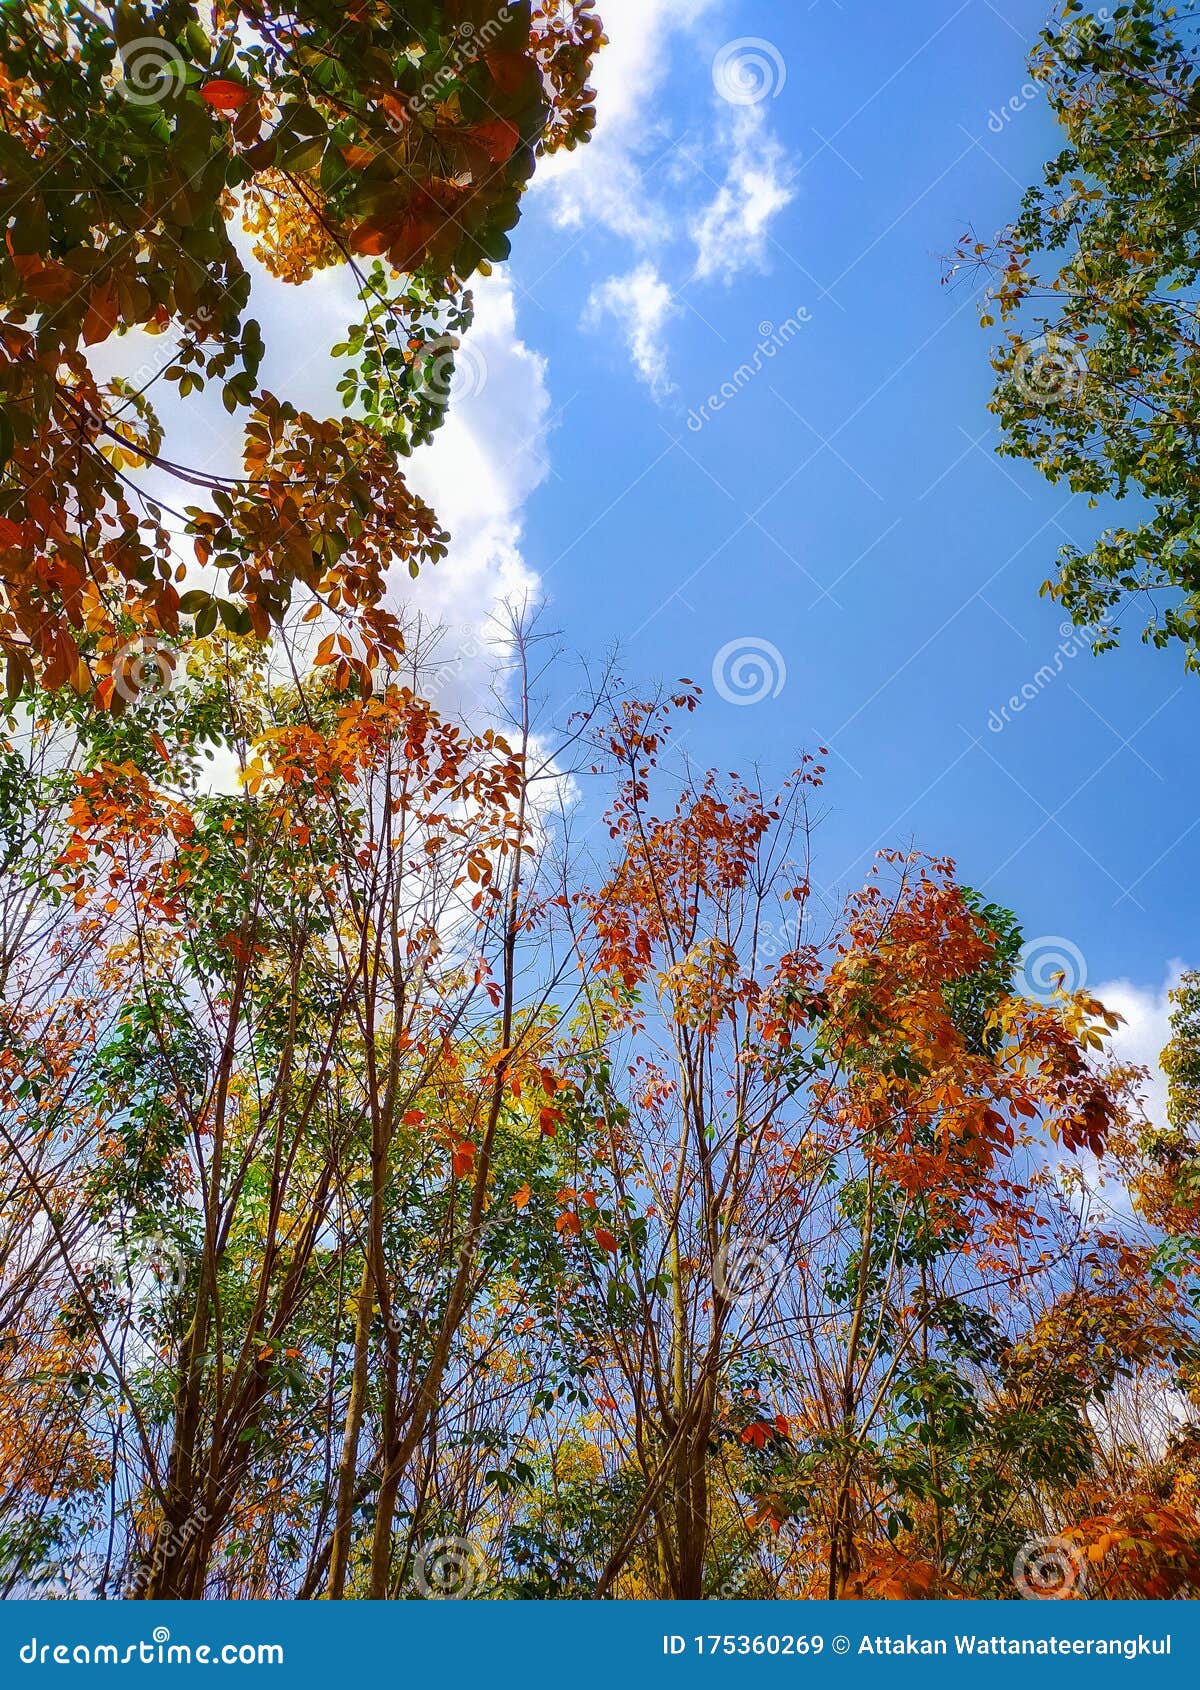 Trees and changing seasons stock image. Image of changing - 175360269